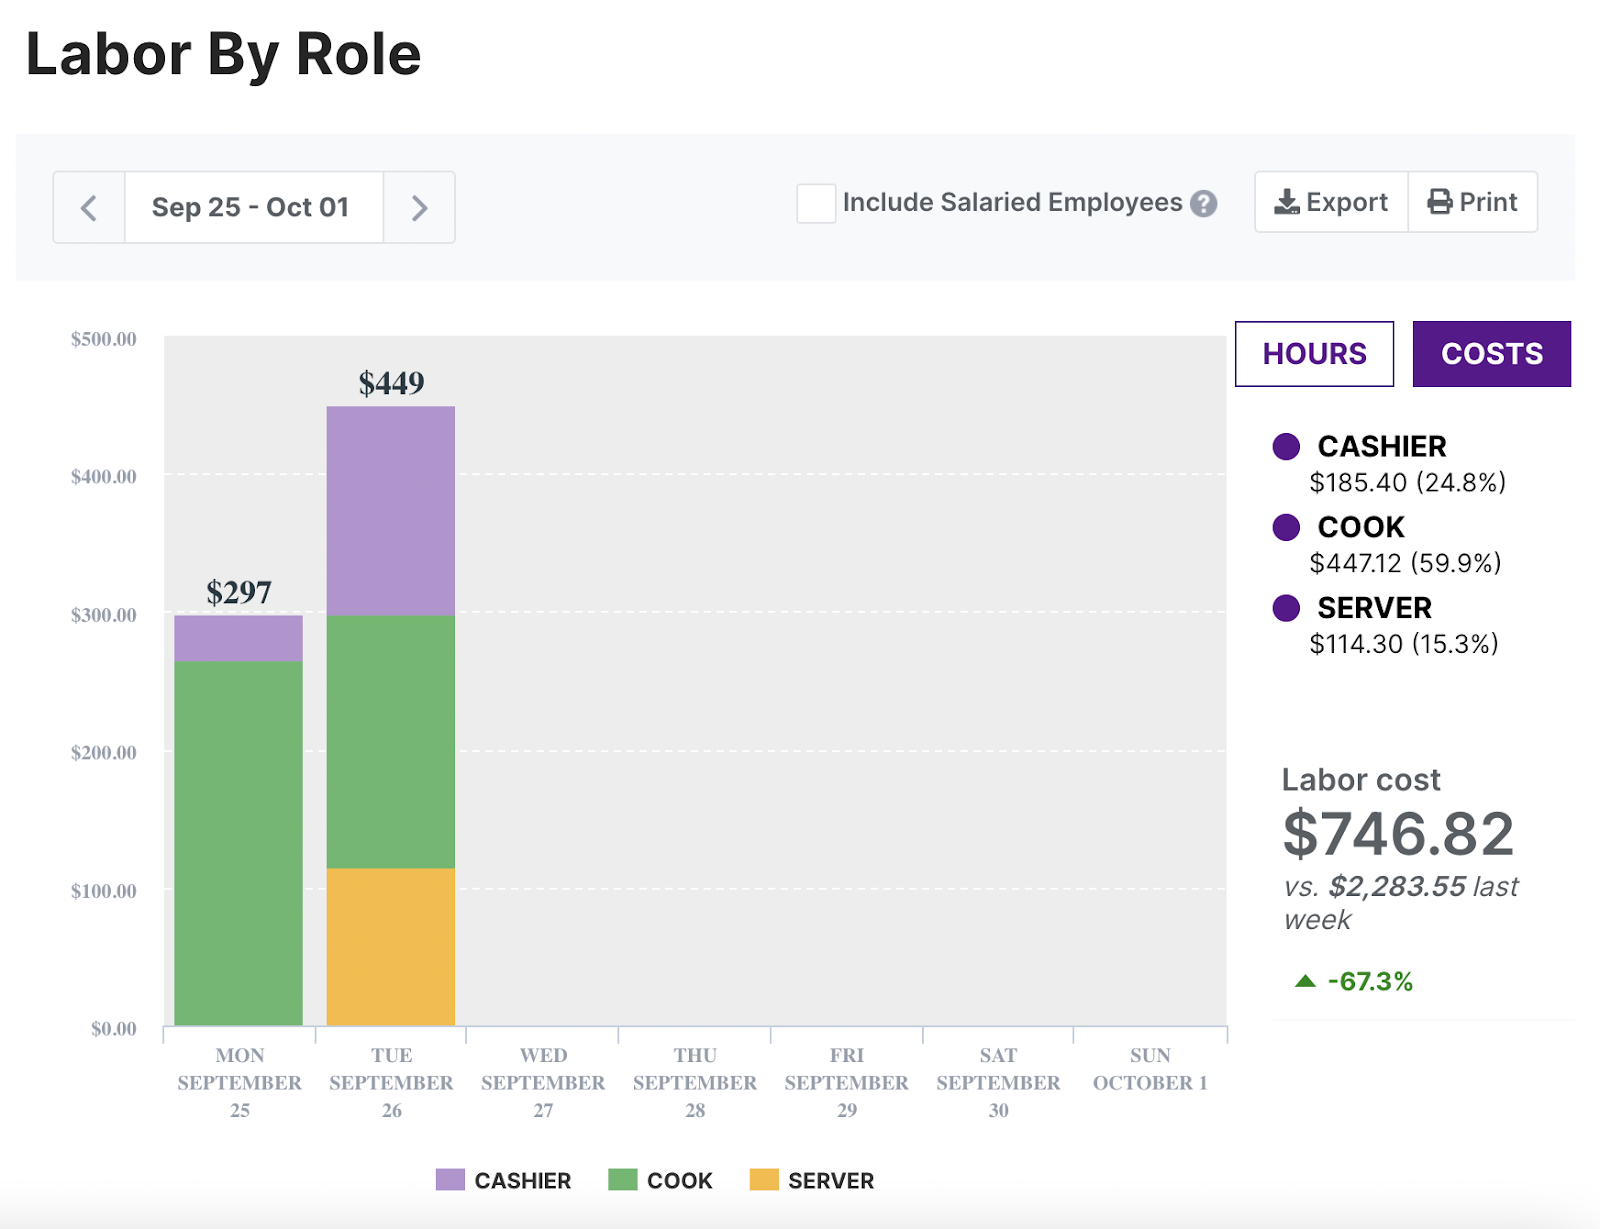 A screenshot of an interface from Homebase analytics showing labor cost broken down by role.